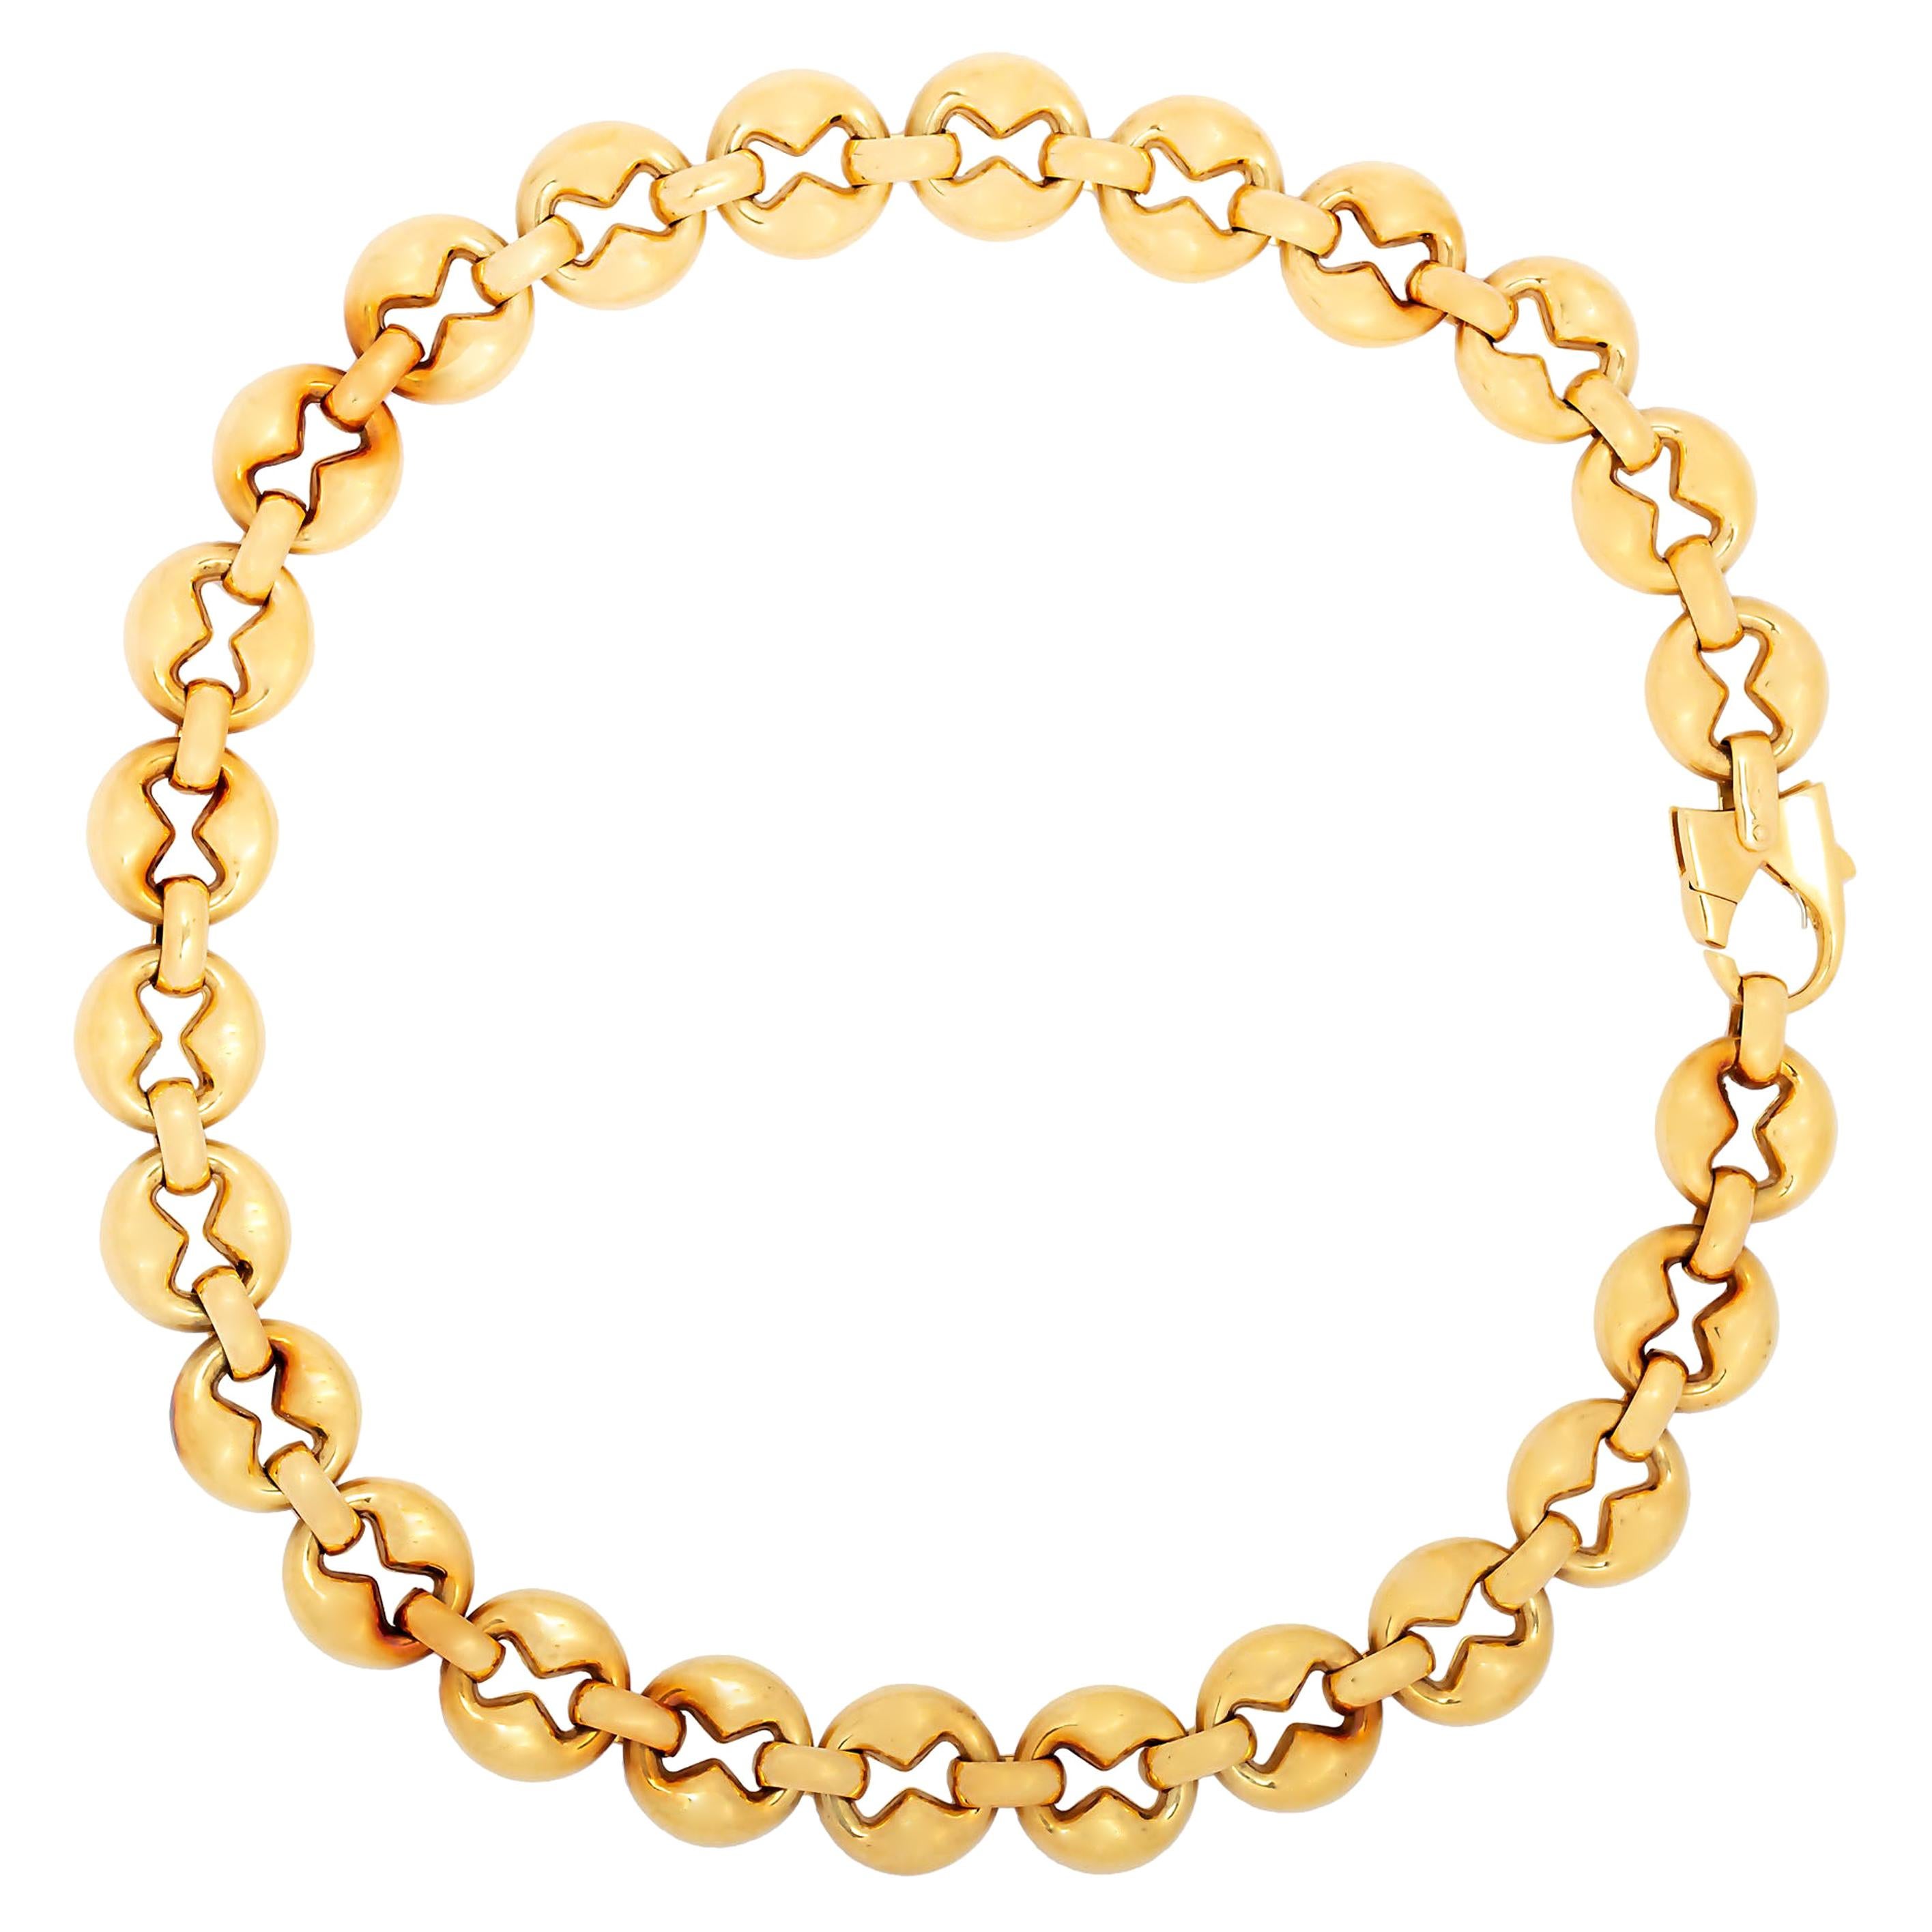 Mariners Puffed Link Chain UnoAErre Necklace 18k Yellow Gold